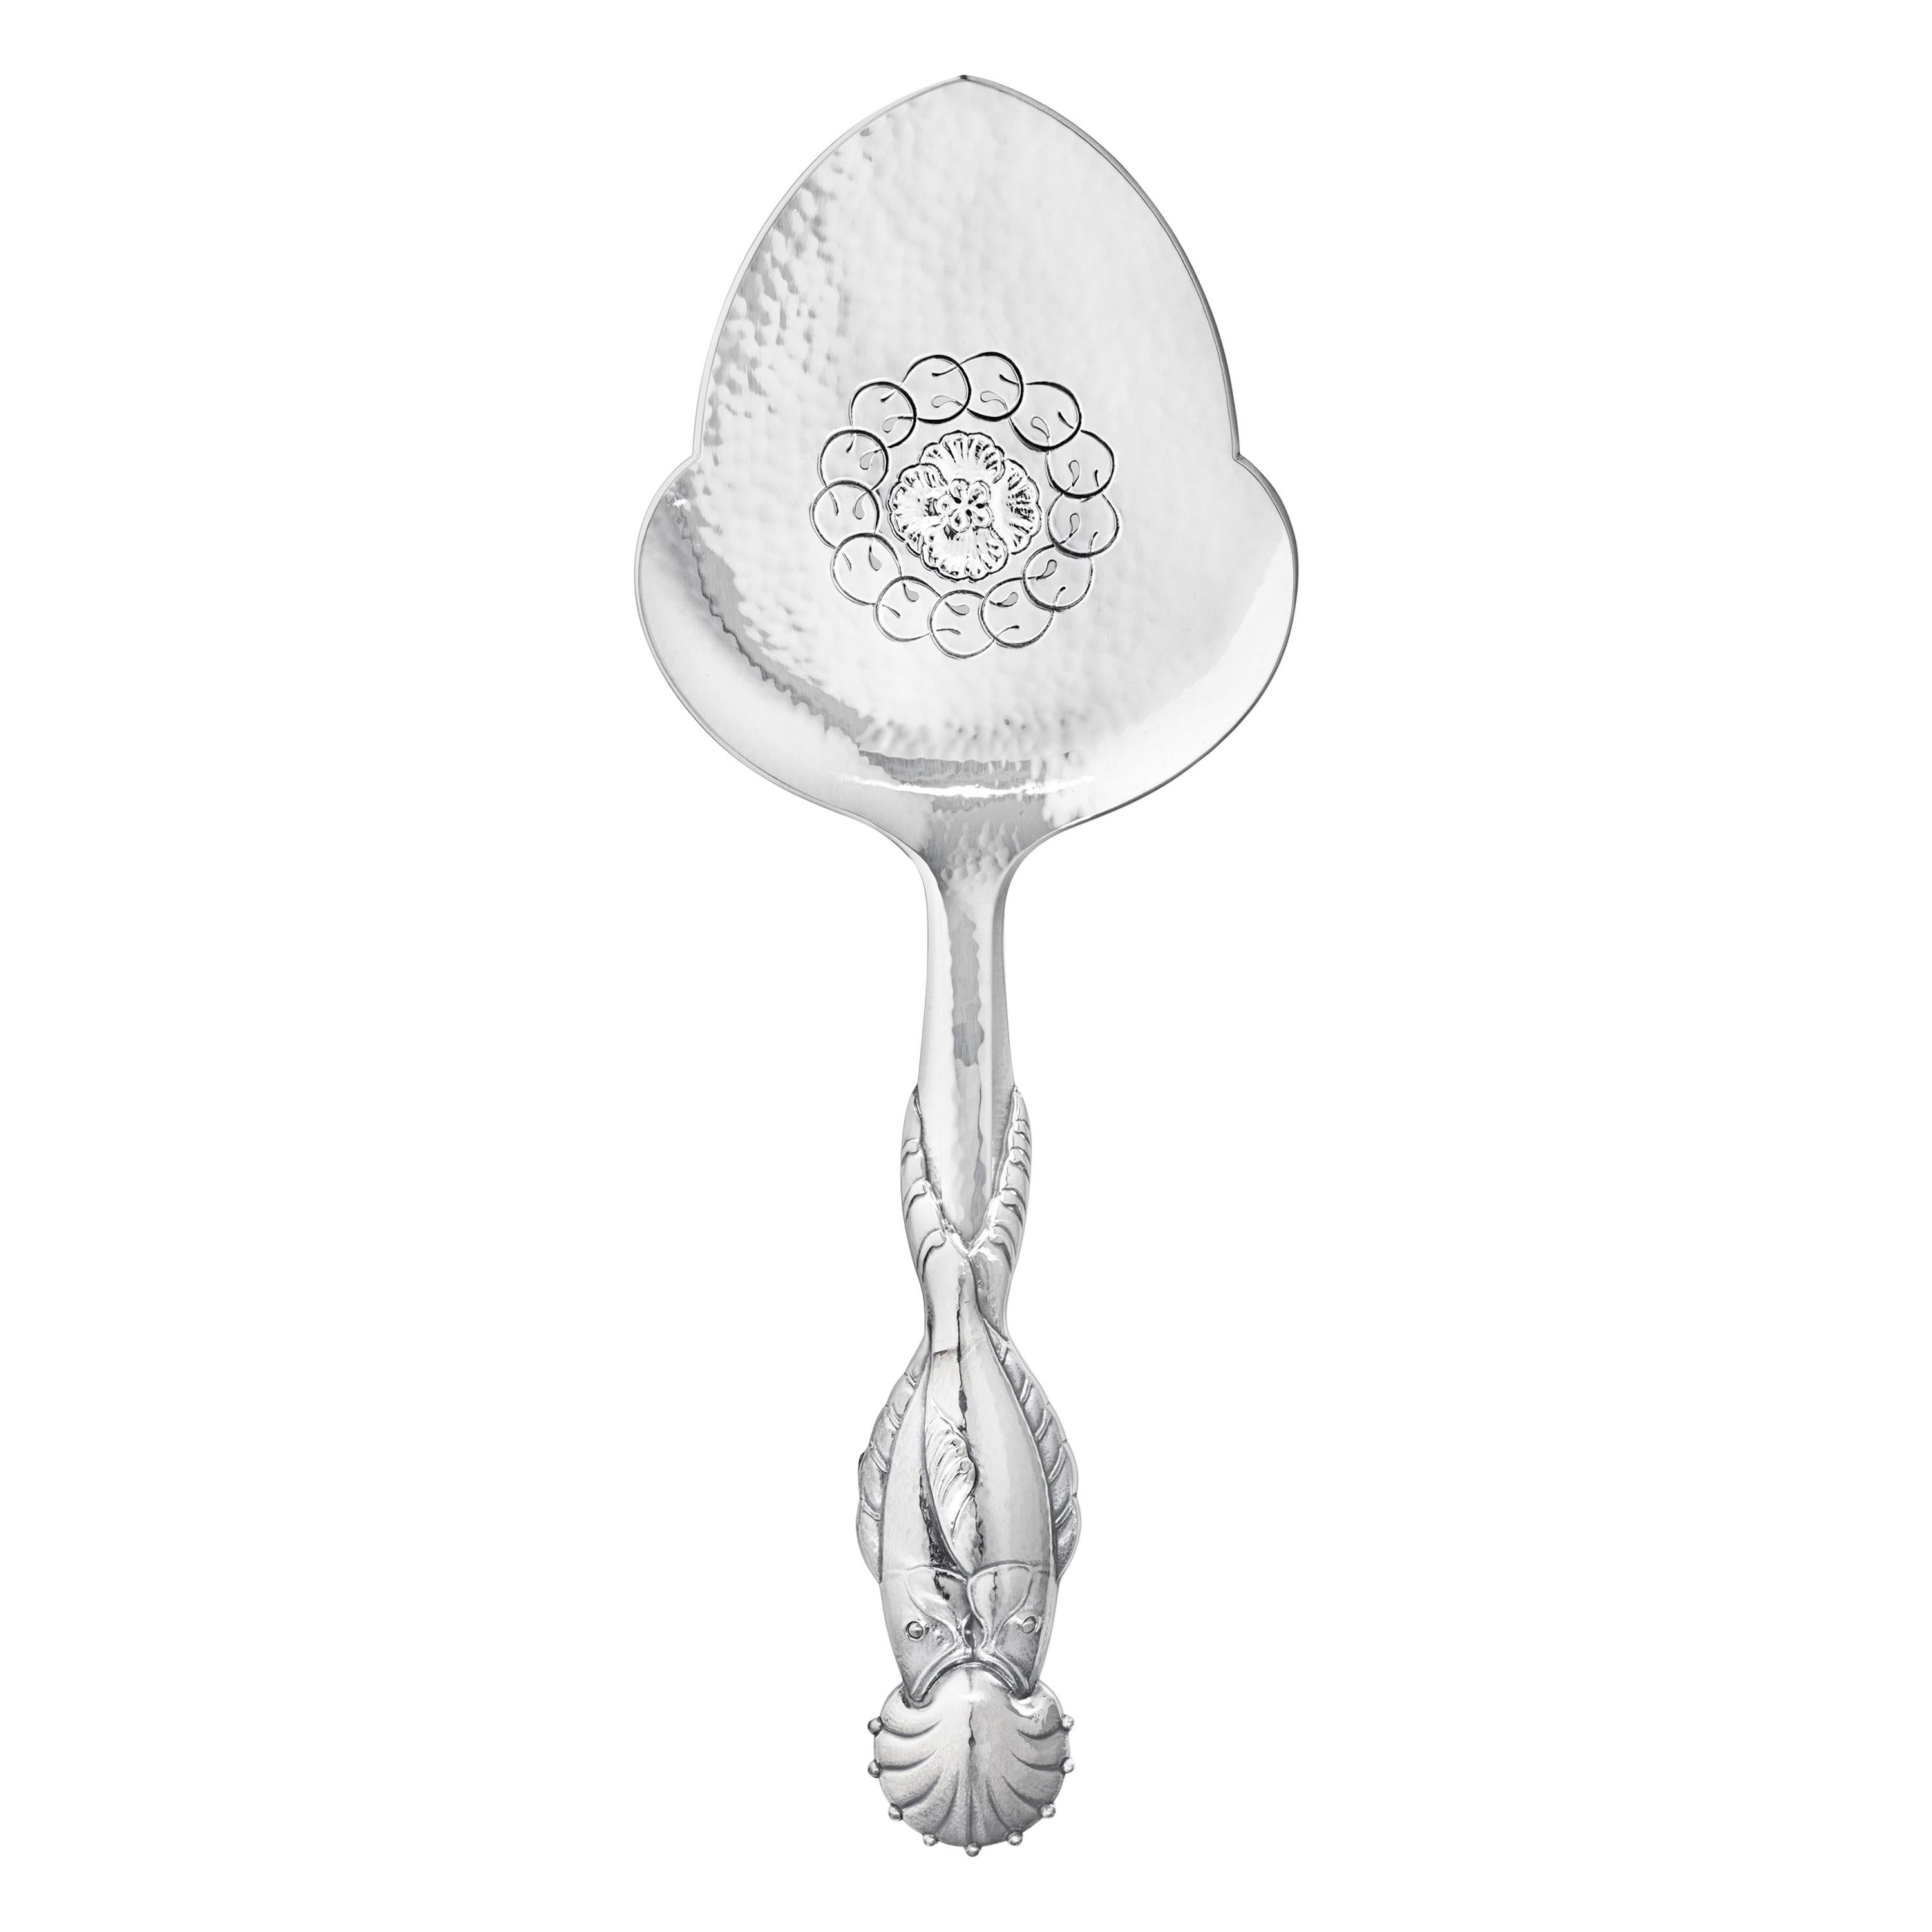 Georg Jensen No. 55 Sterling Silver Fish Serving Spoon with Fish Motif For Sale